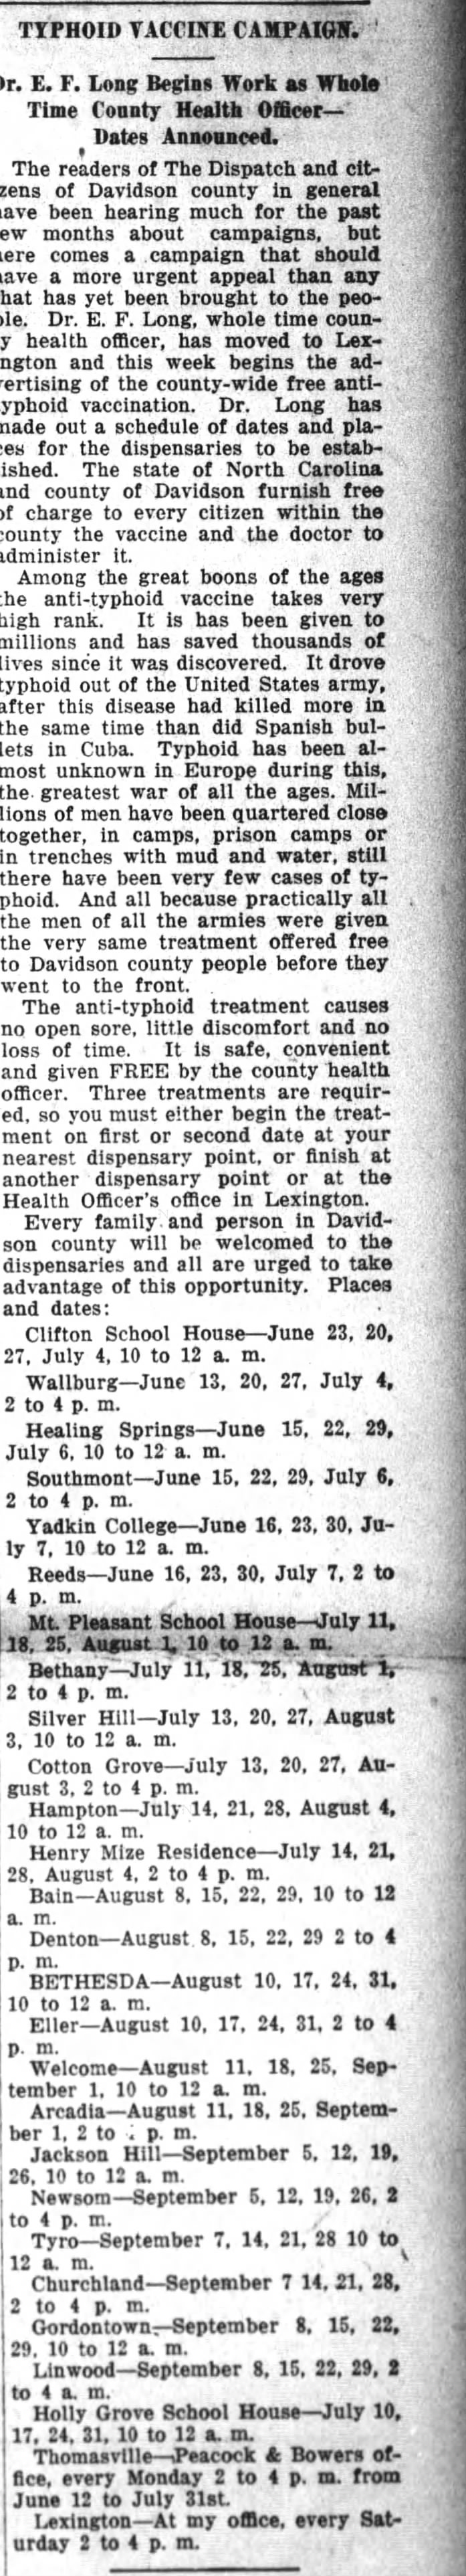 Typhoid Vaccine Campaign. The Dispatch. 7 June 1916